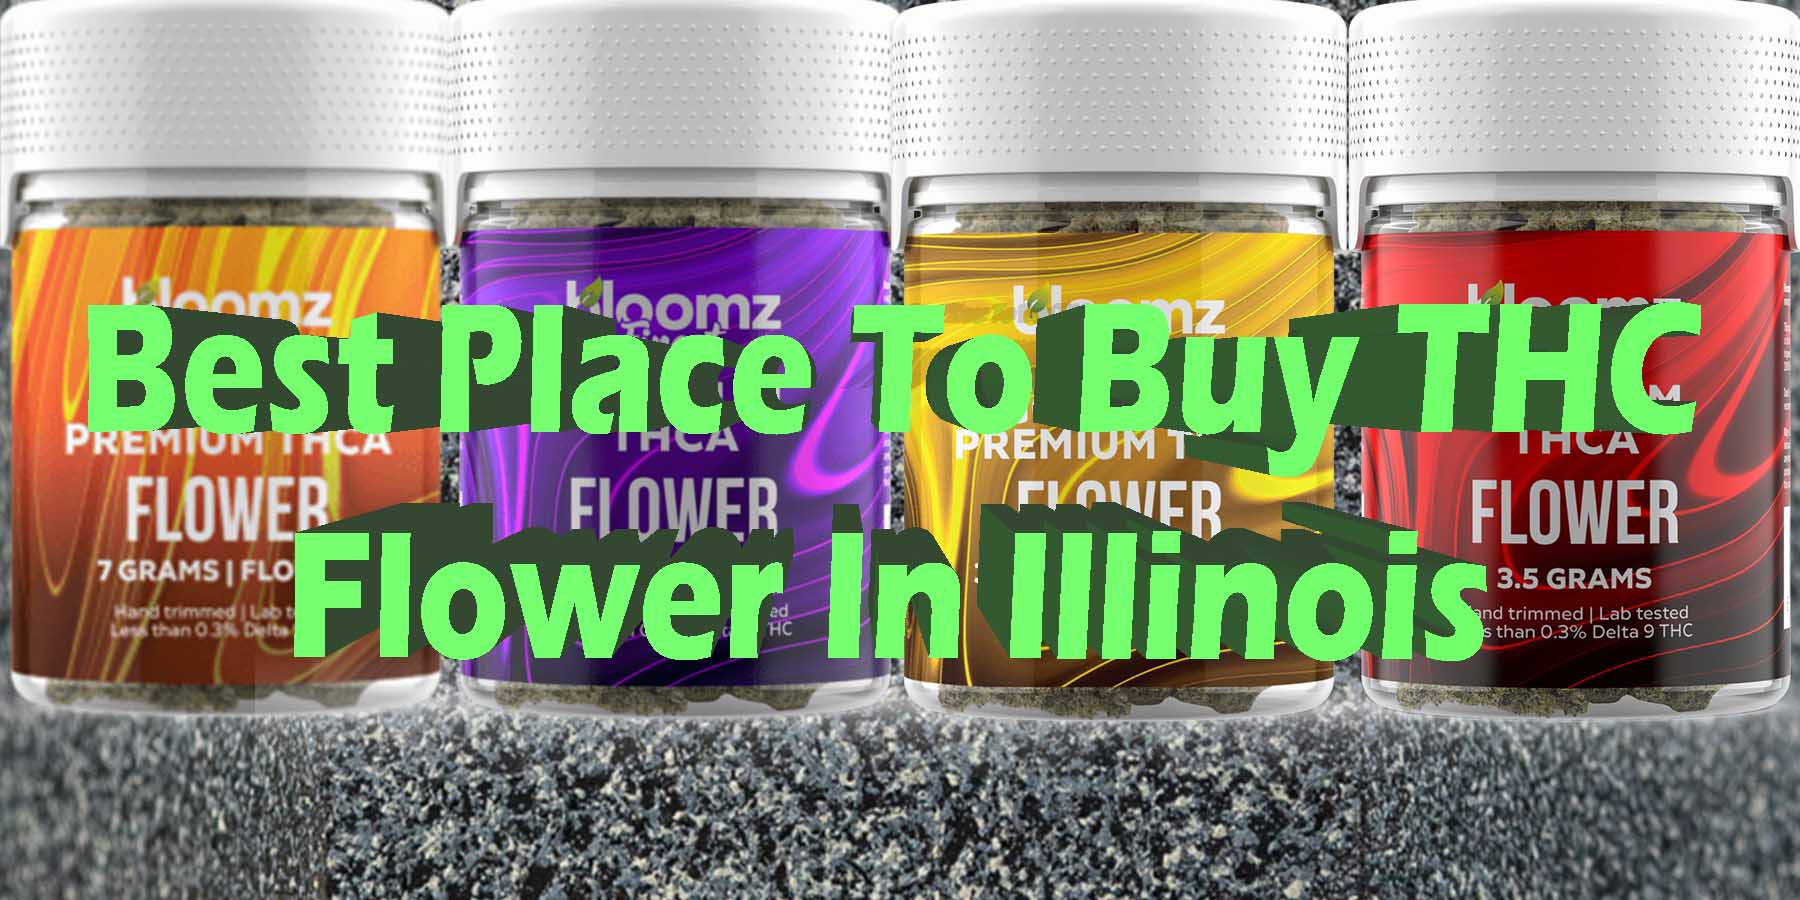 Best Place To Buy THC Flower In Illinois WhereToGet HowToGetNearMe BestPlace LowestPrice Coupon Discount For Smoking Best High Smoke Shop Online Near Me StrongestBrand BestBrand Binoid